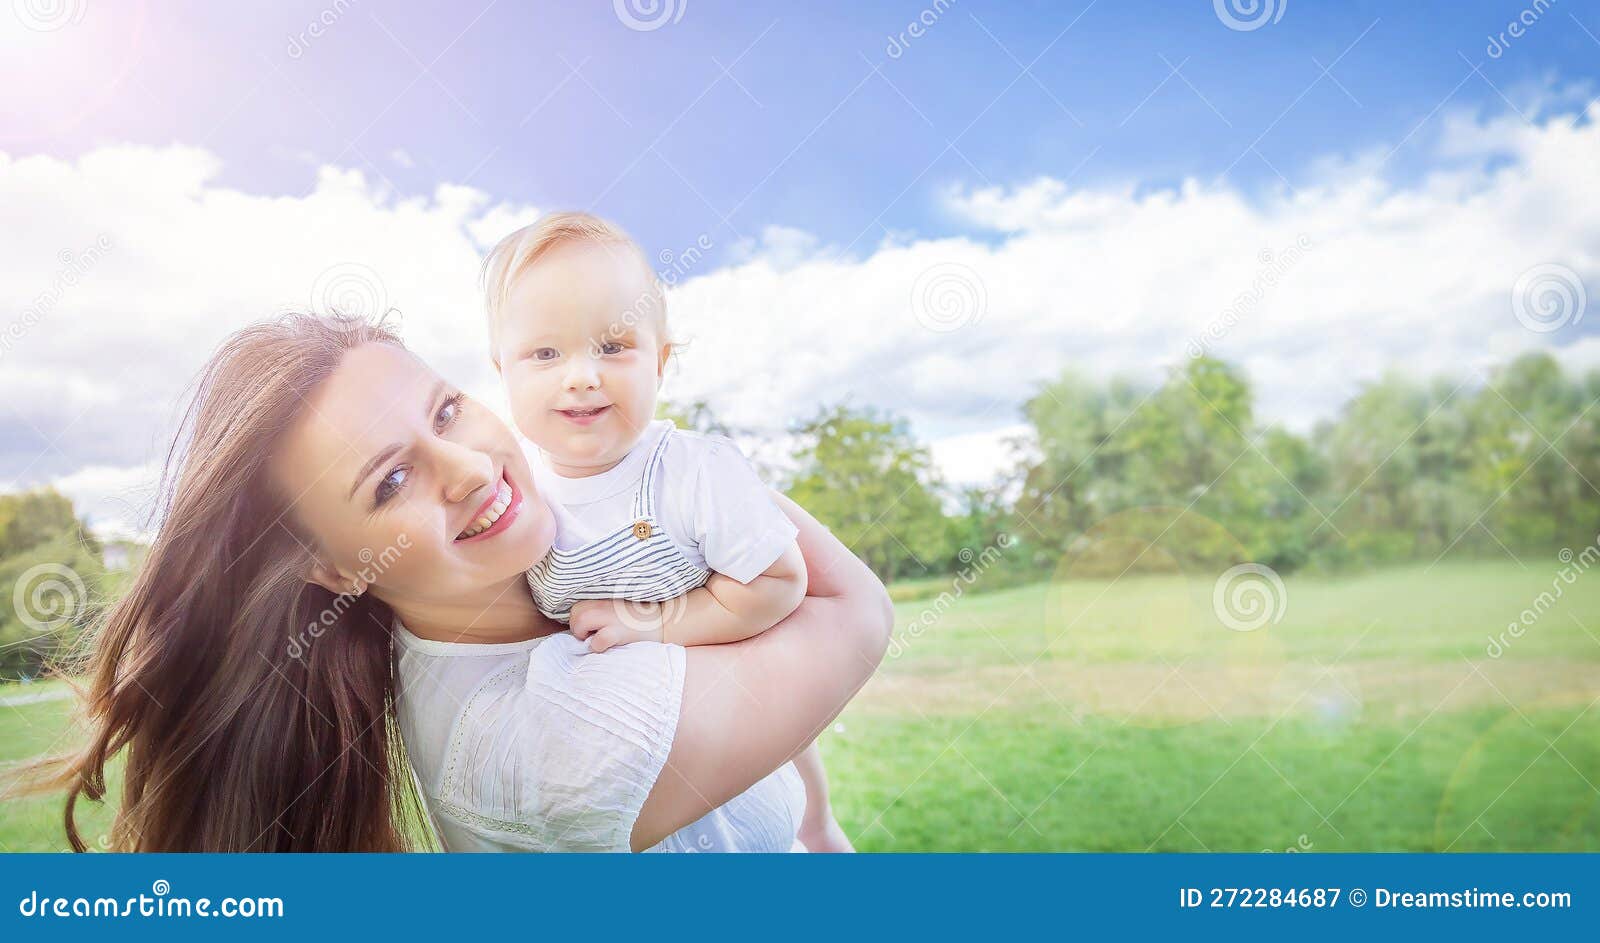 banner of caucasians happy baby (boy) and his mother. healthy child (kid) having fun with mom in the summer.